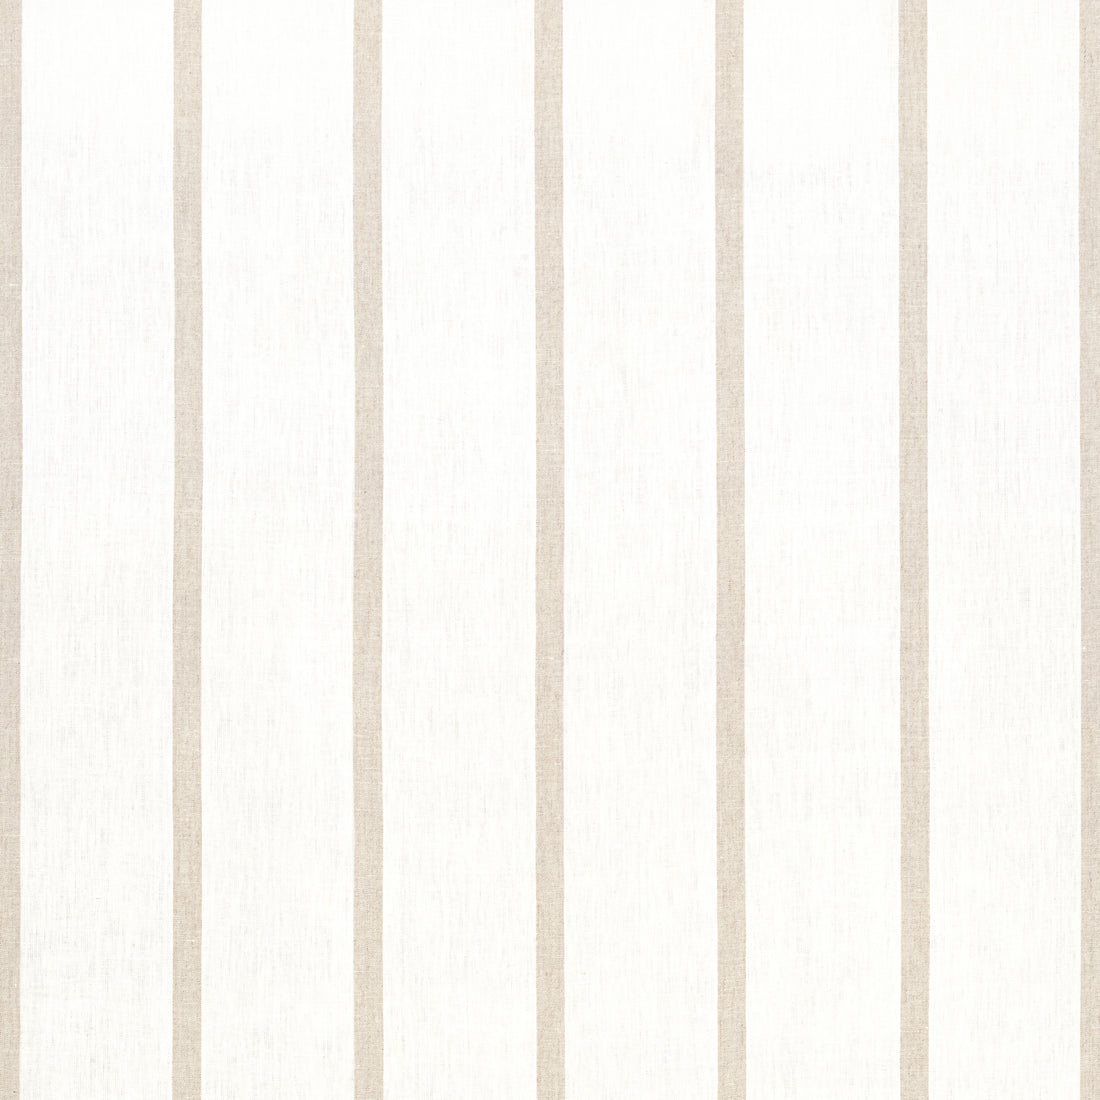 Sailing Stripe fabric in beige and white color - pattern number AW15133 - by Anna French in the Antilles collection